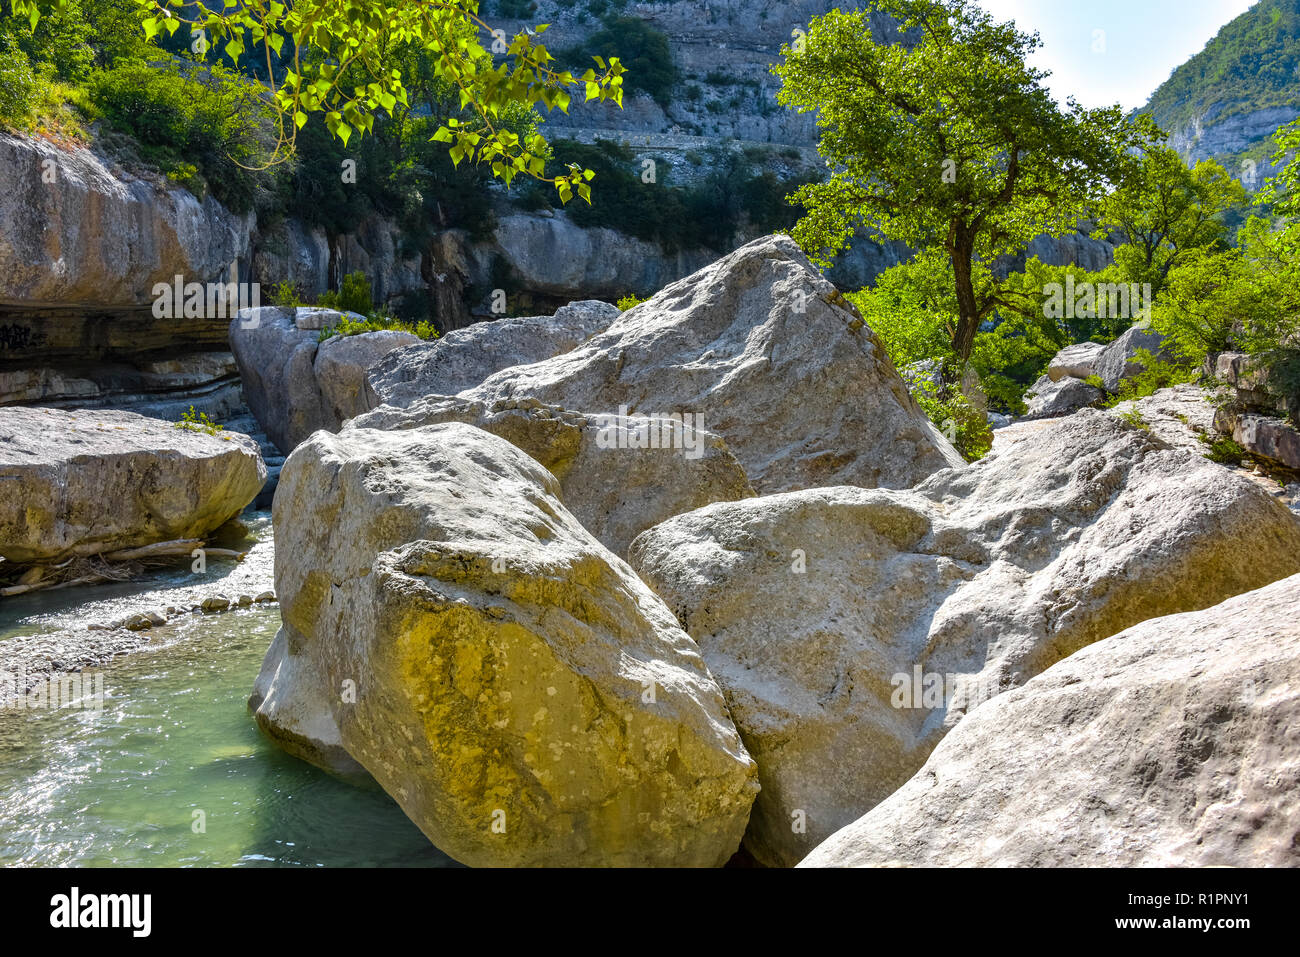 Gorges de la Méouge, Provence, France, big rocks and trees in the riverbed Stock Photo